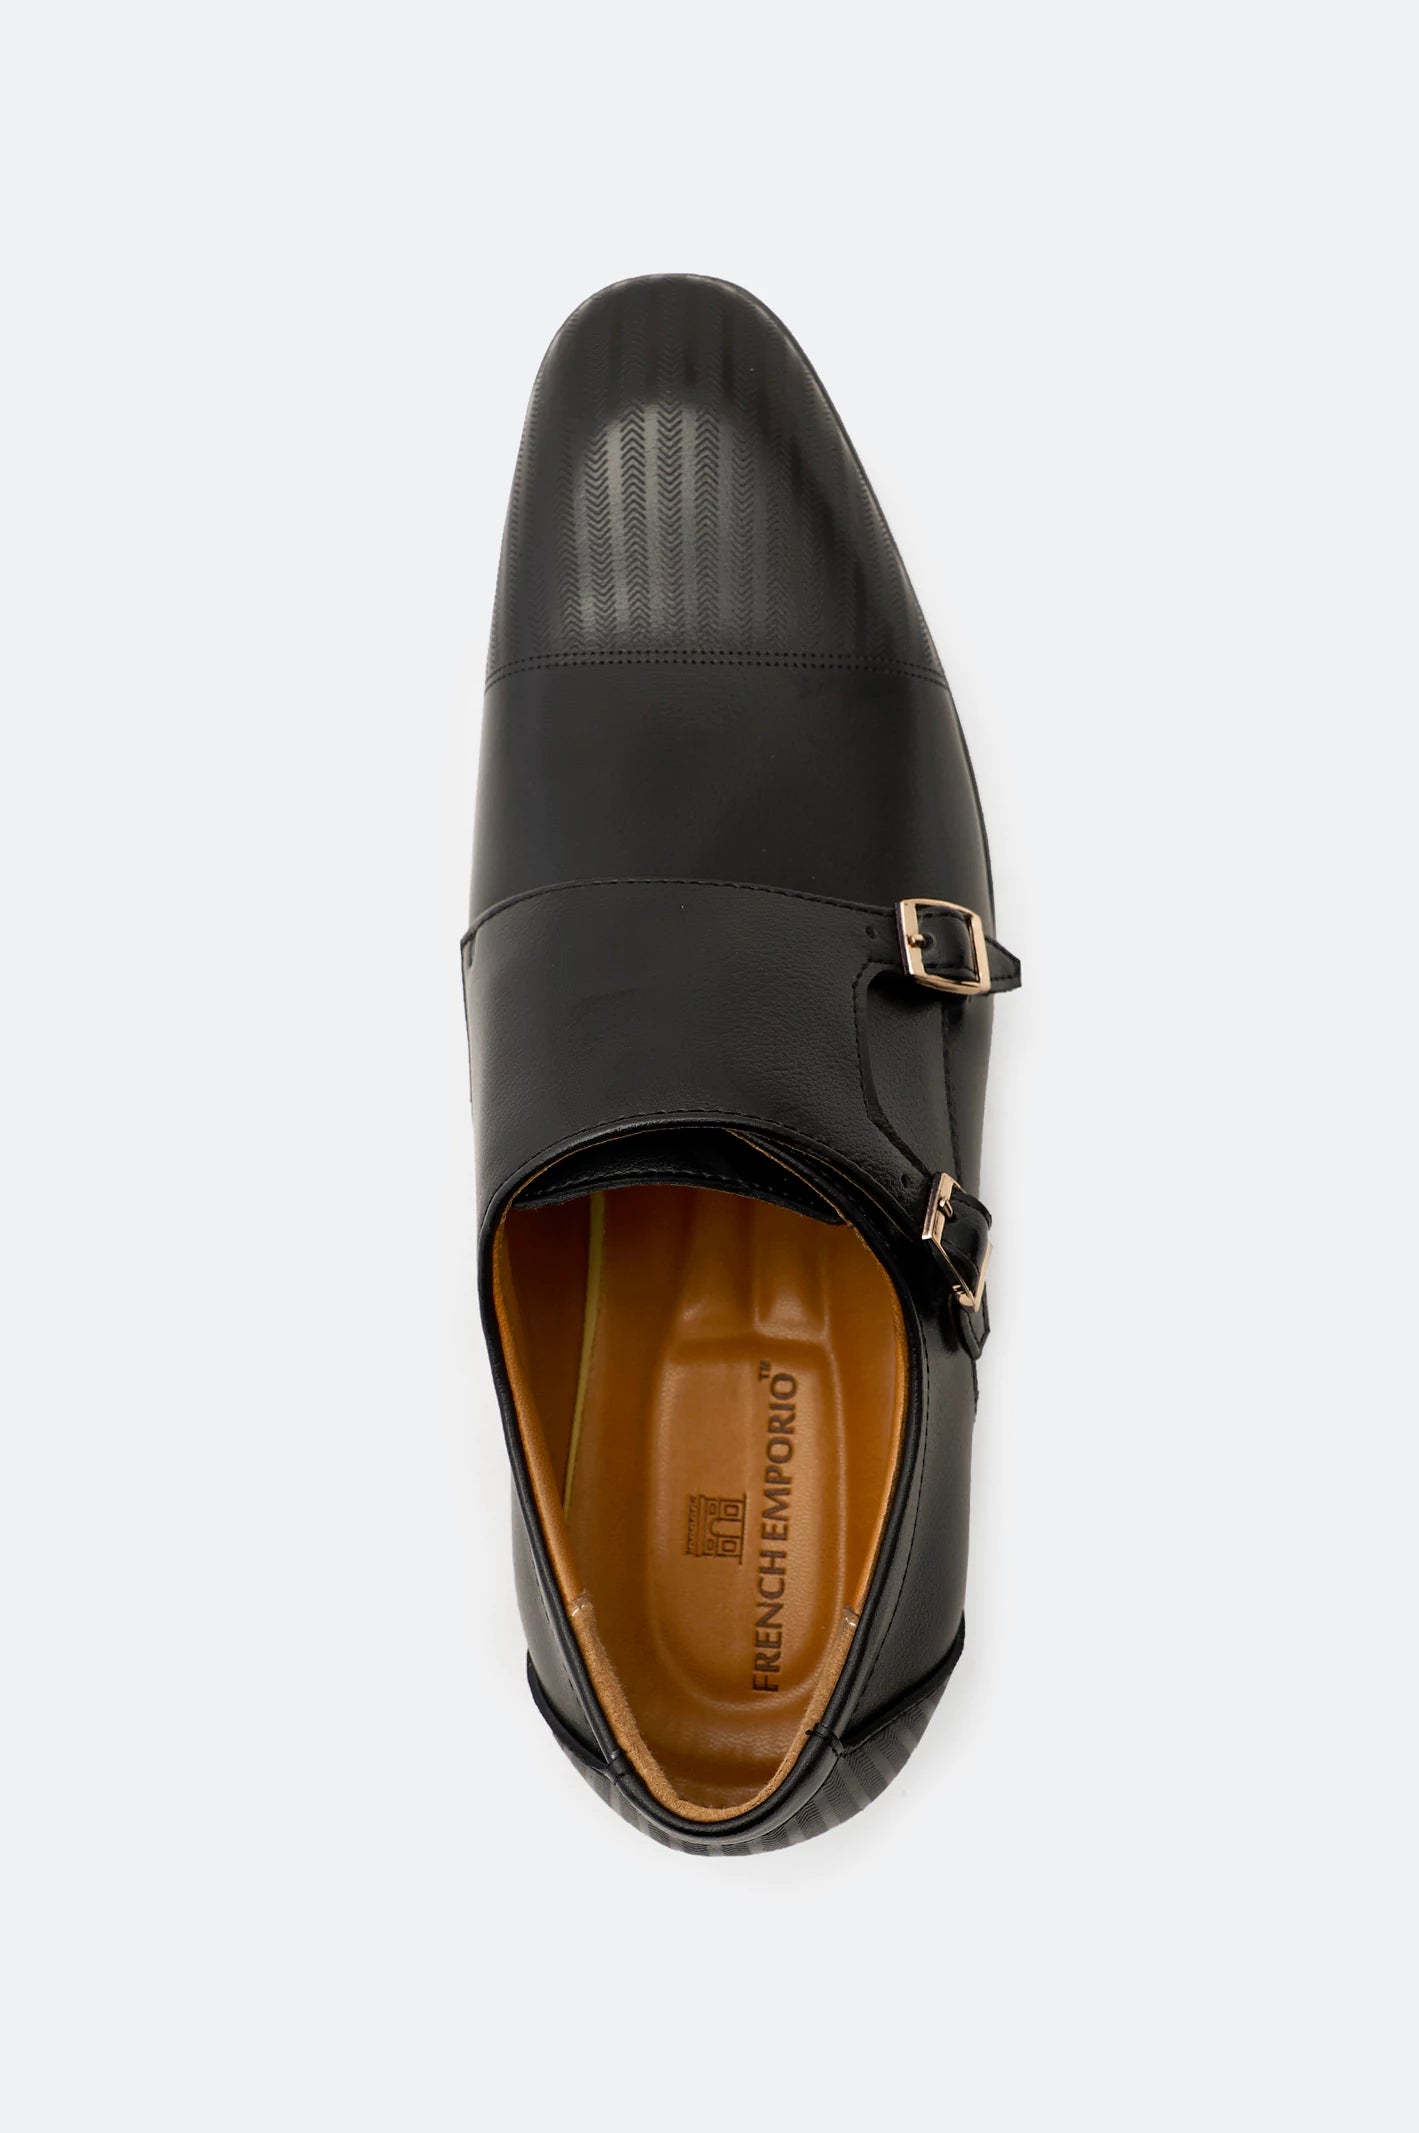 Premium Black Formal Shoes From Diners